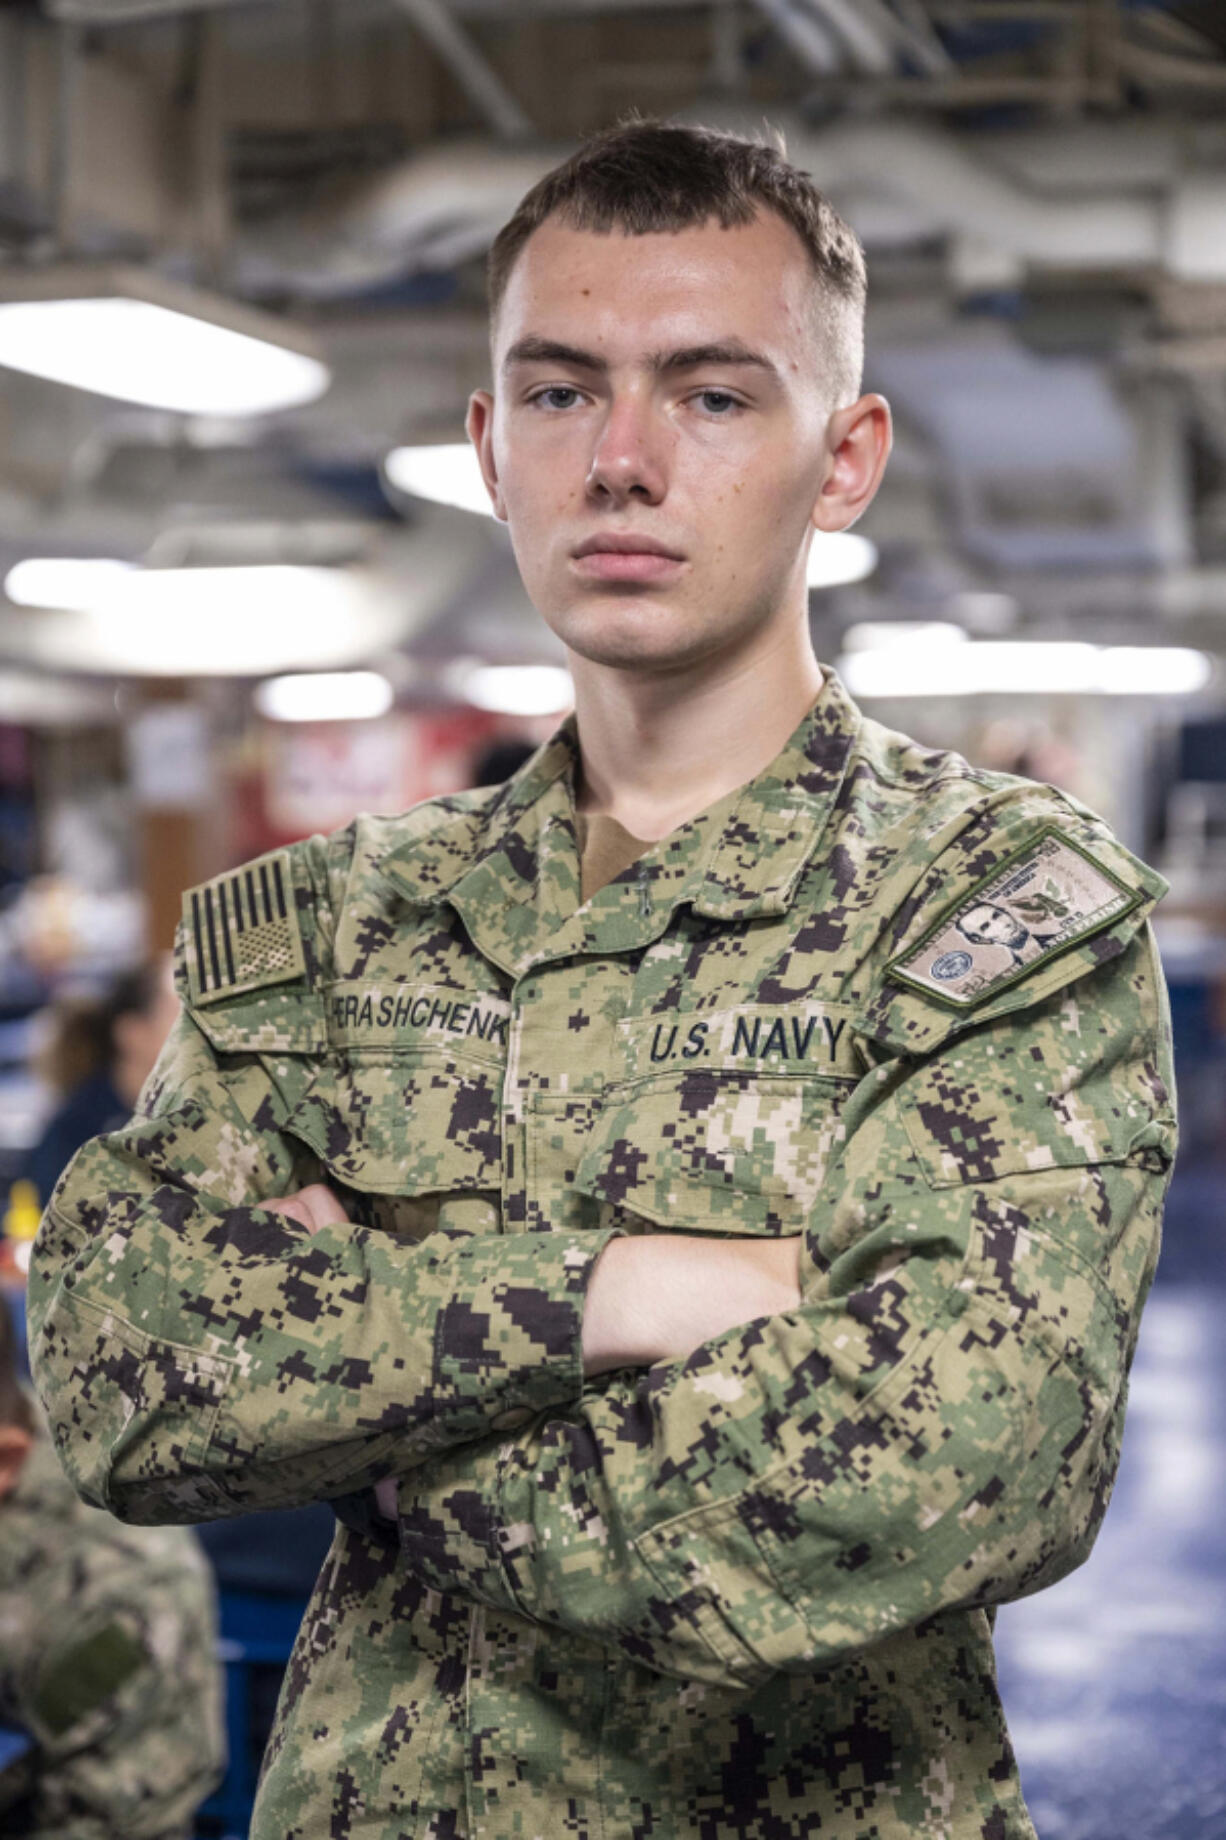 Airman Rostyslylav Herashchenko is an aviation boatswain's mate aboard USS Abraham Lincoln, a U.S. Navy aircraft carrier operating out of San Diego.